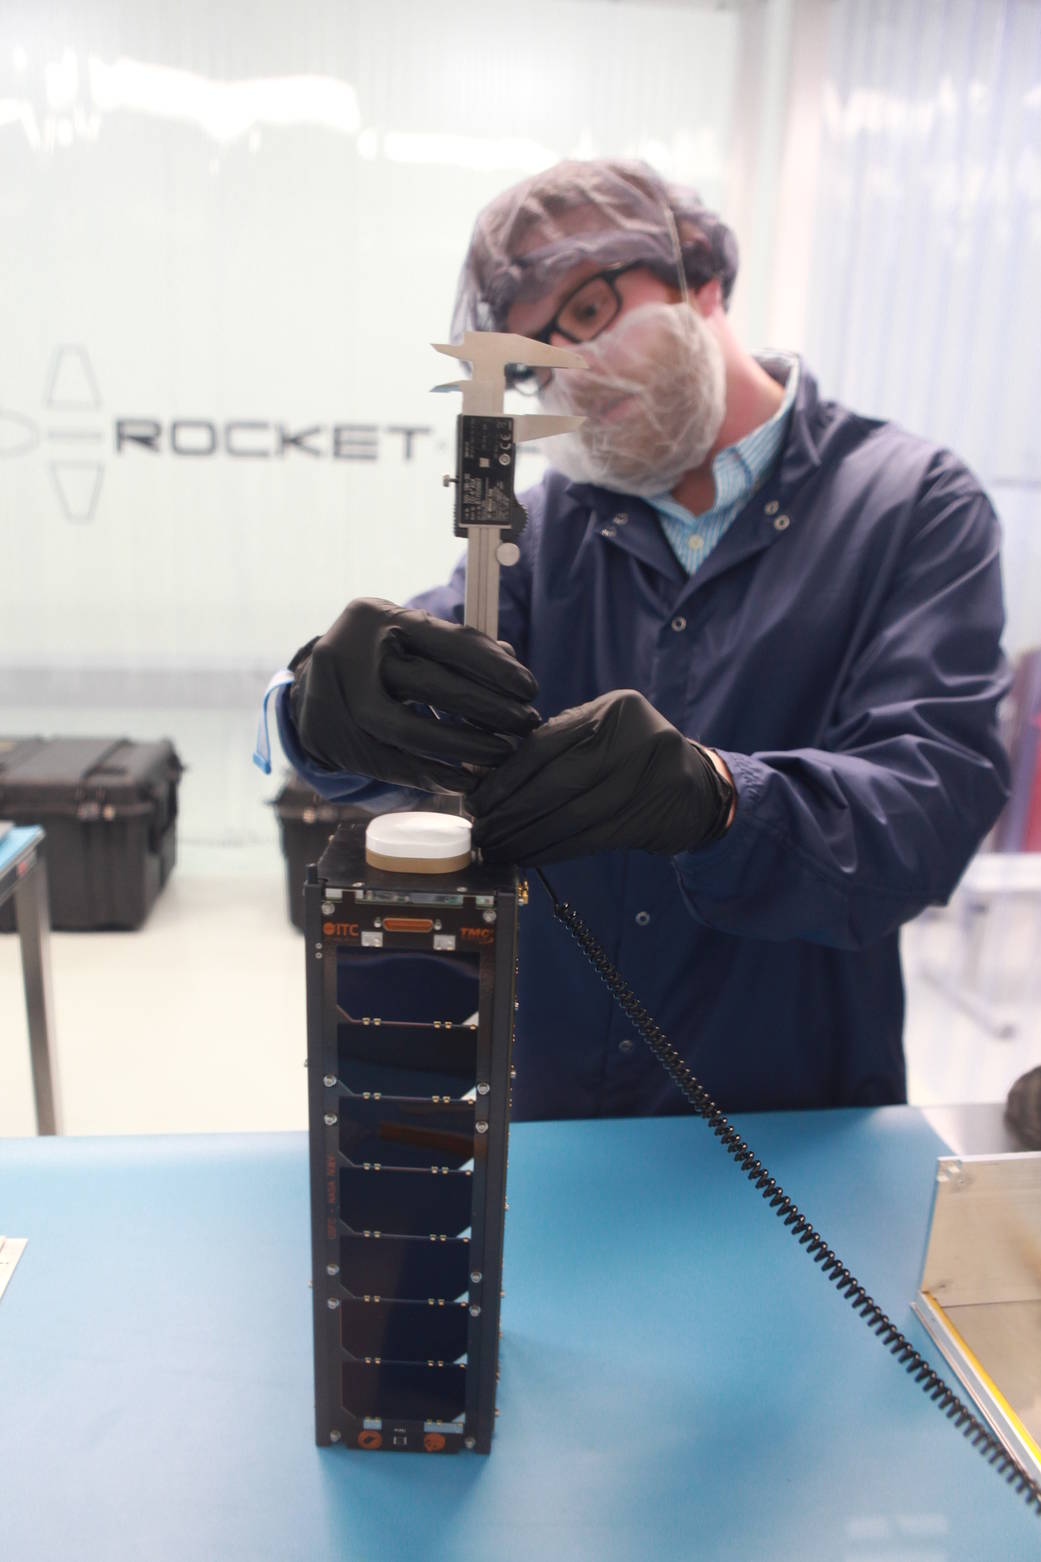 The STF-1 CubeSat is prepared for launch.